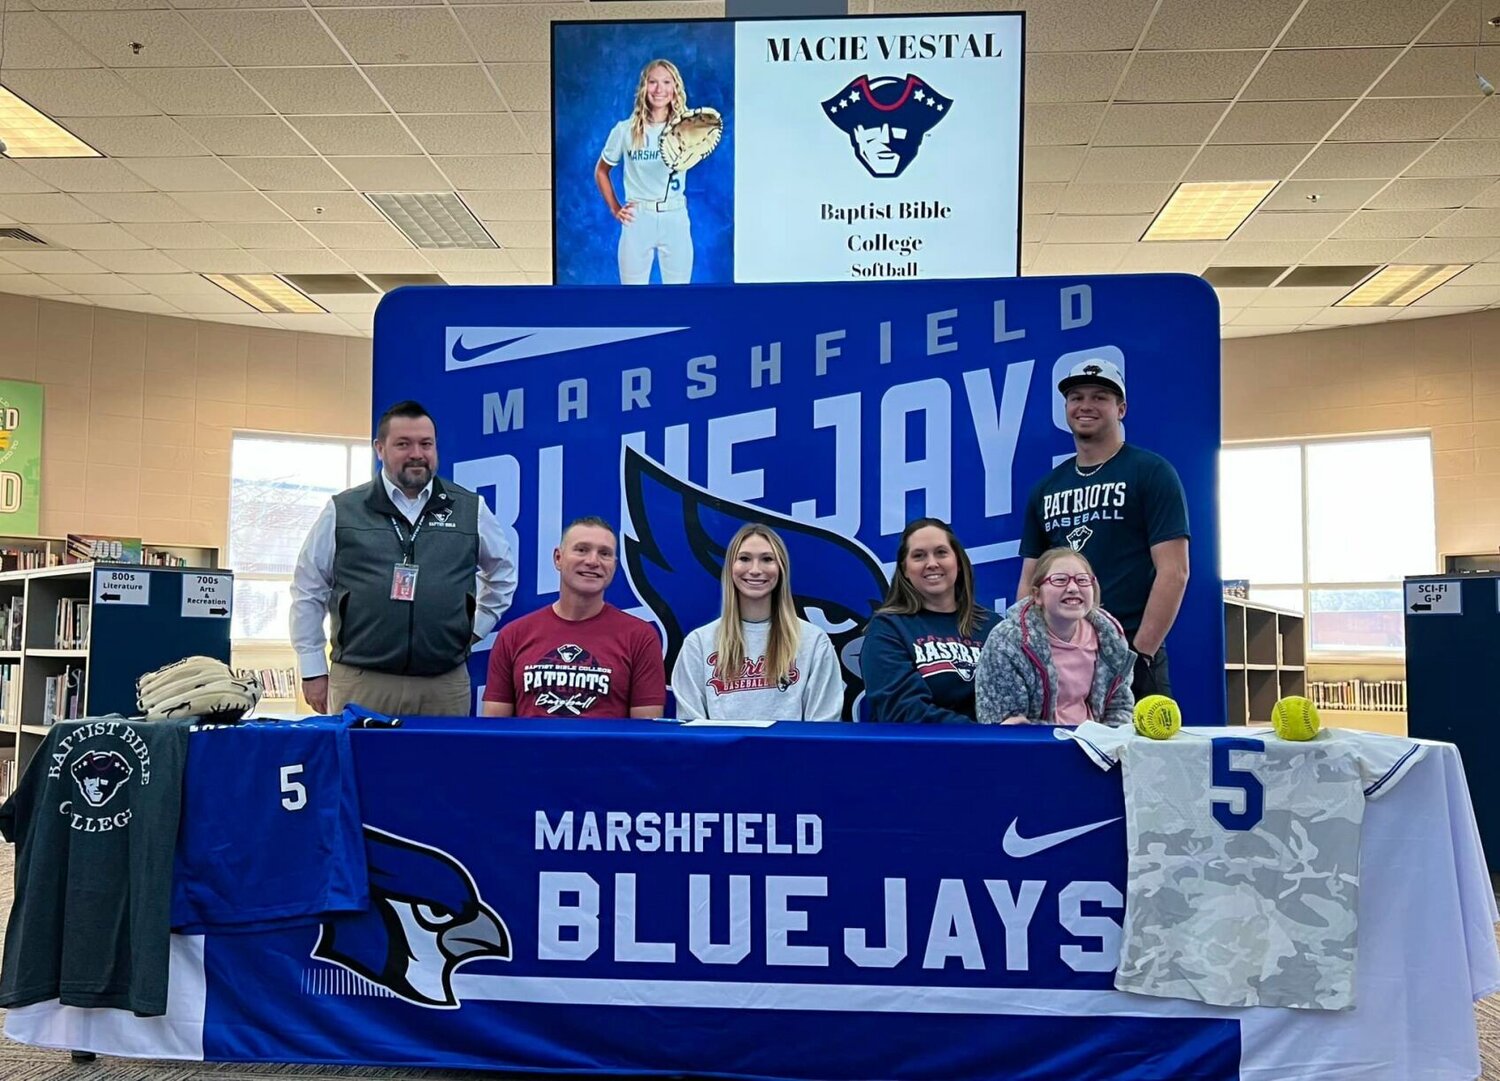 Macie Vestal is pictured with her family after she signed her letter to play softball at Baptist Bible College. 